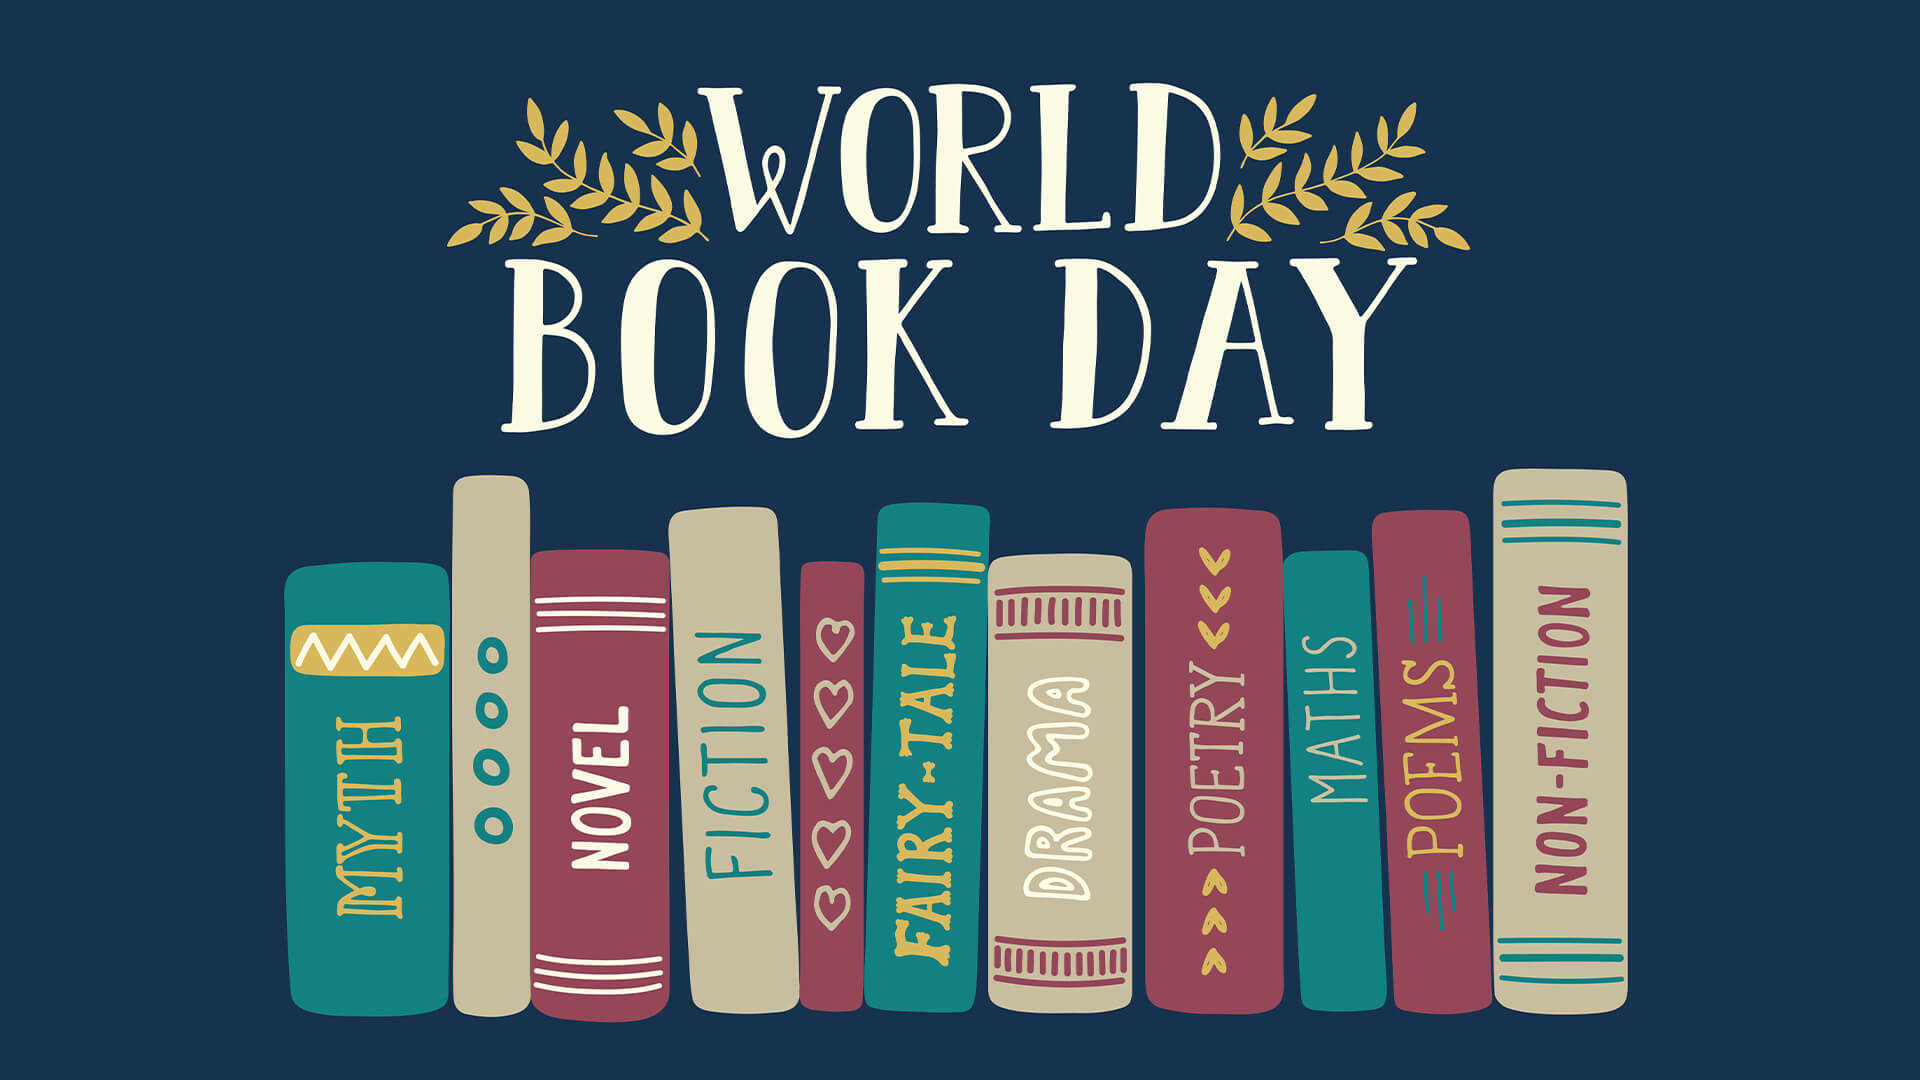 Happy World Book Day 2021! Here are our favourite books